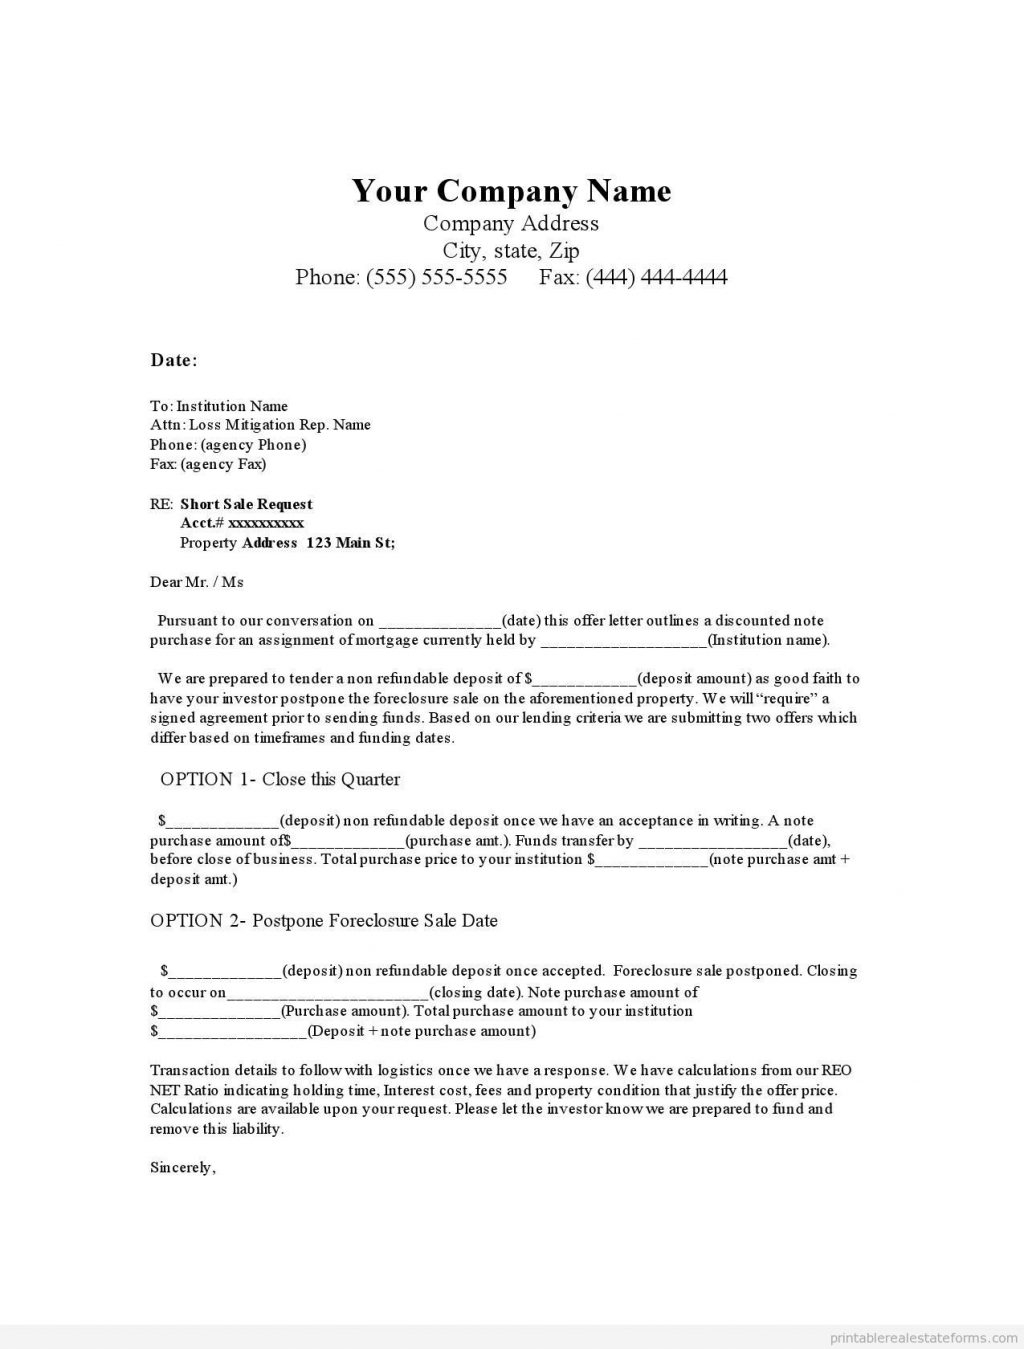 Land Offer Letter Template from simpleartifact.com